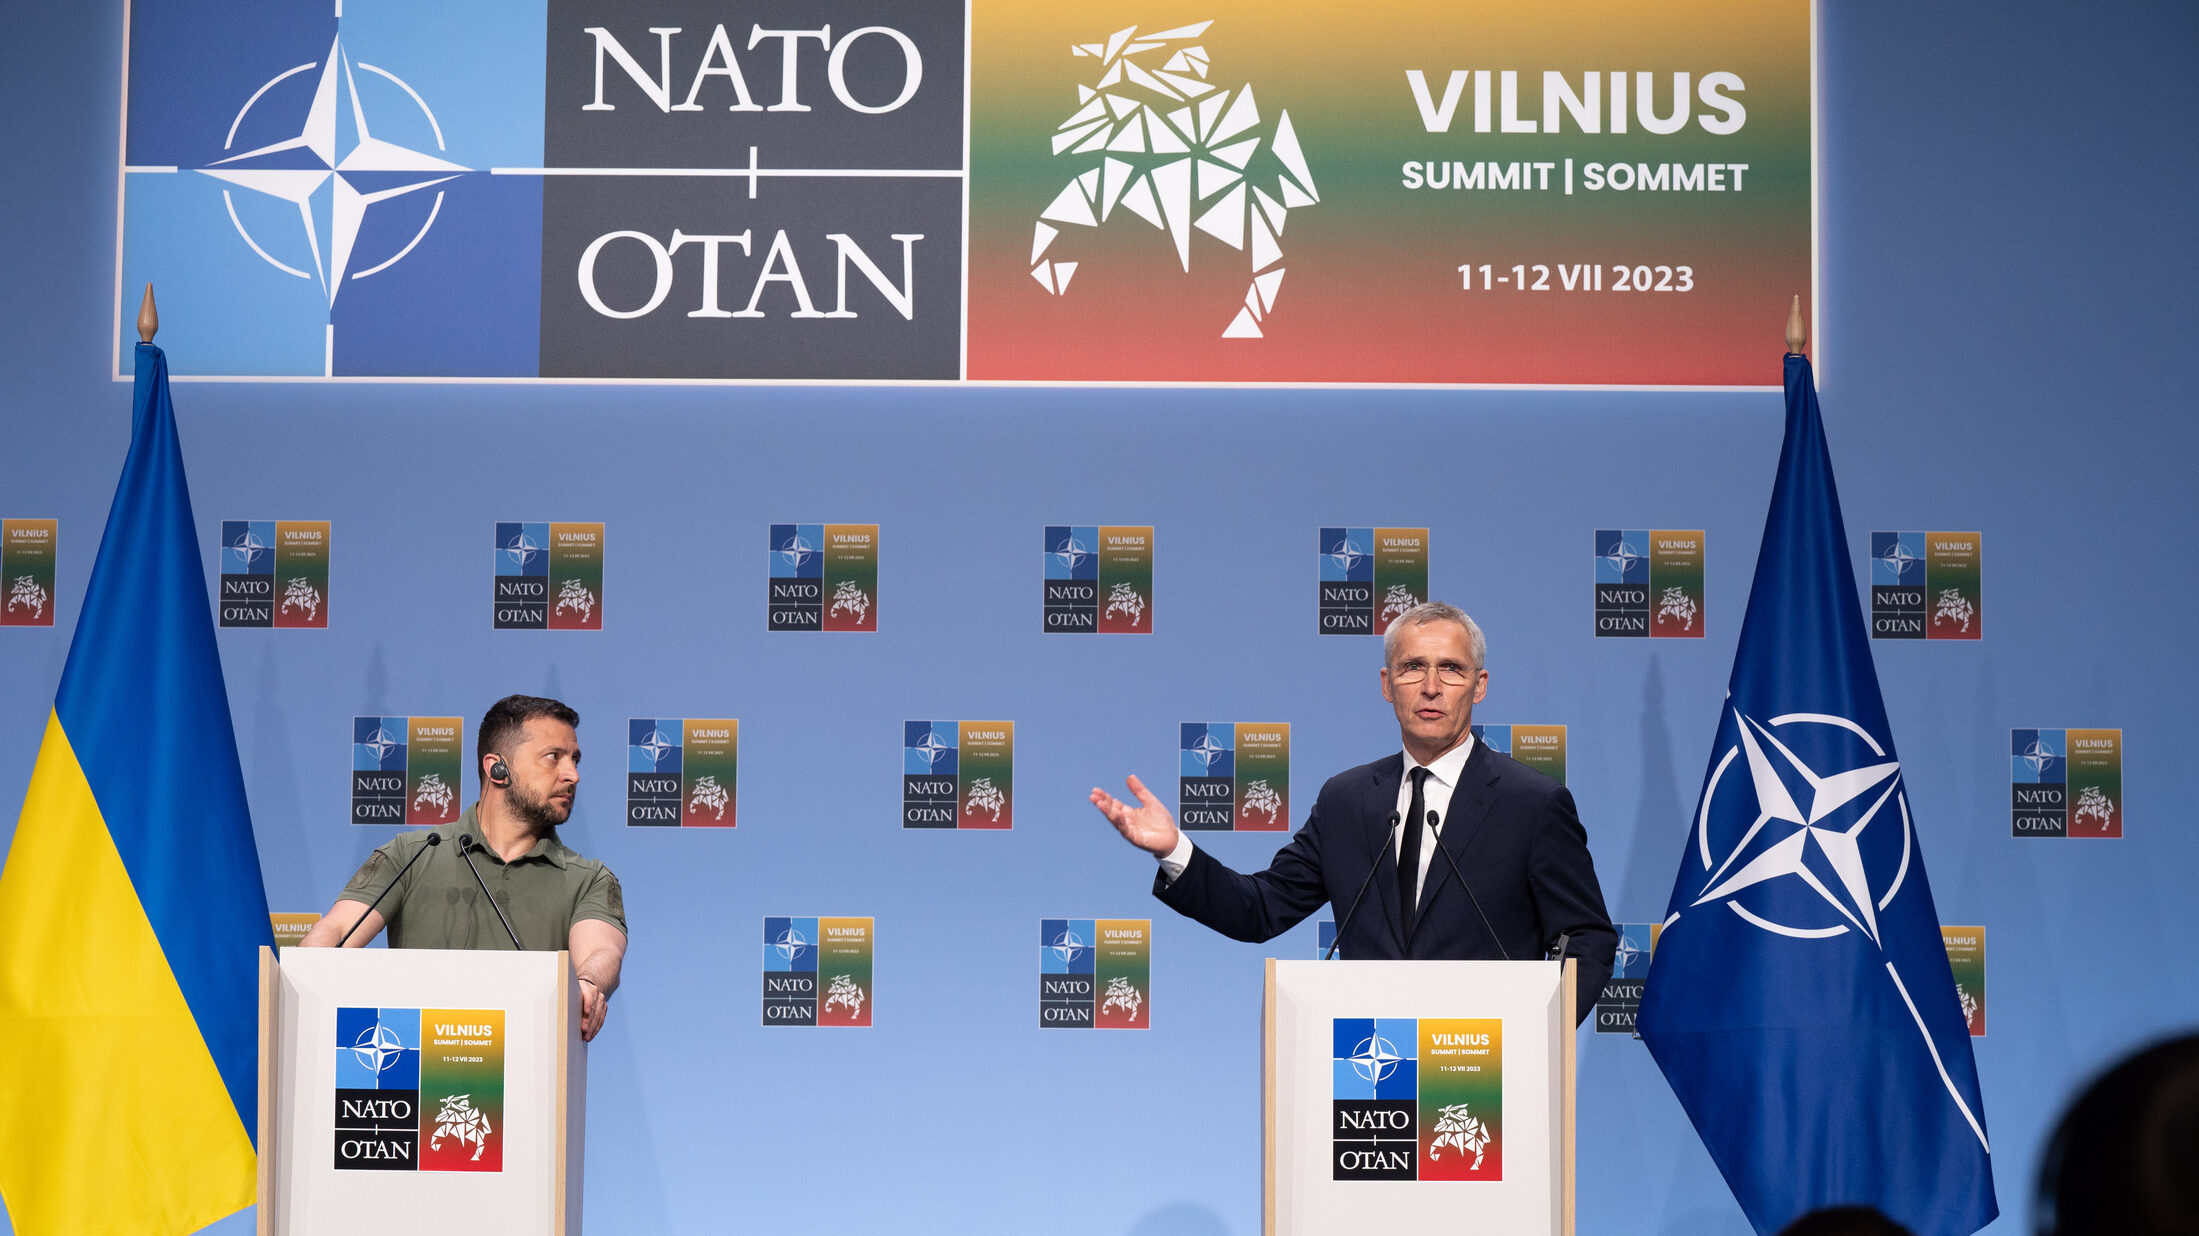 Joint press conference following the bilateral meeting by the NATO Secretary General and the President of Ukraine – 2023 NATO Vilnius Summit